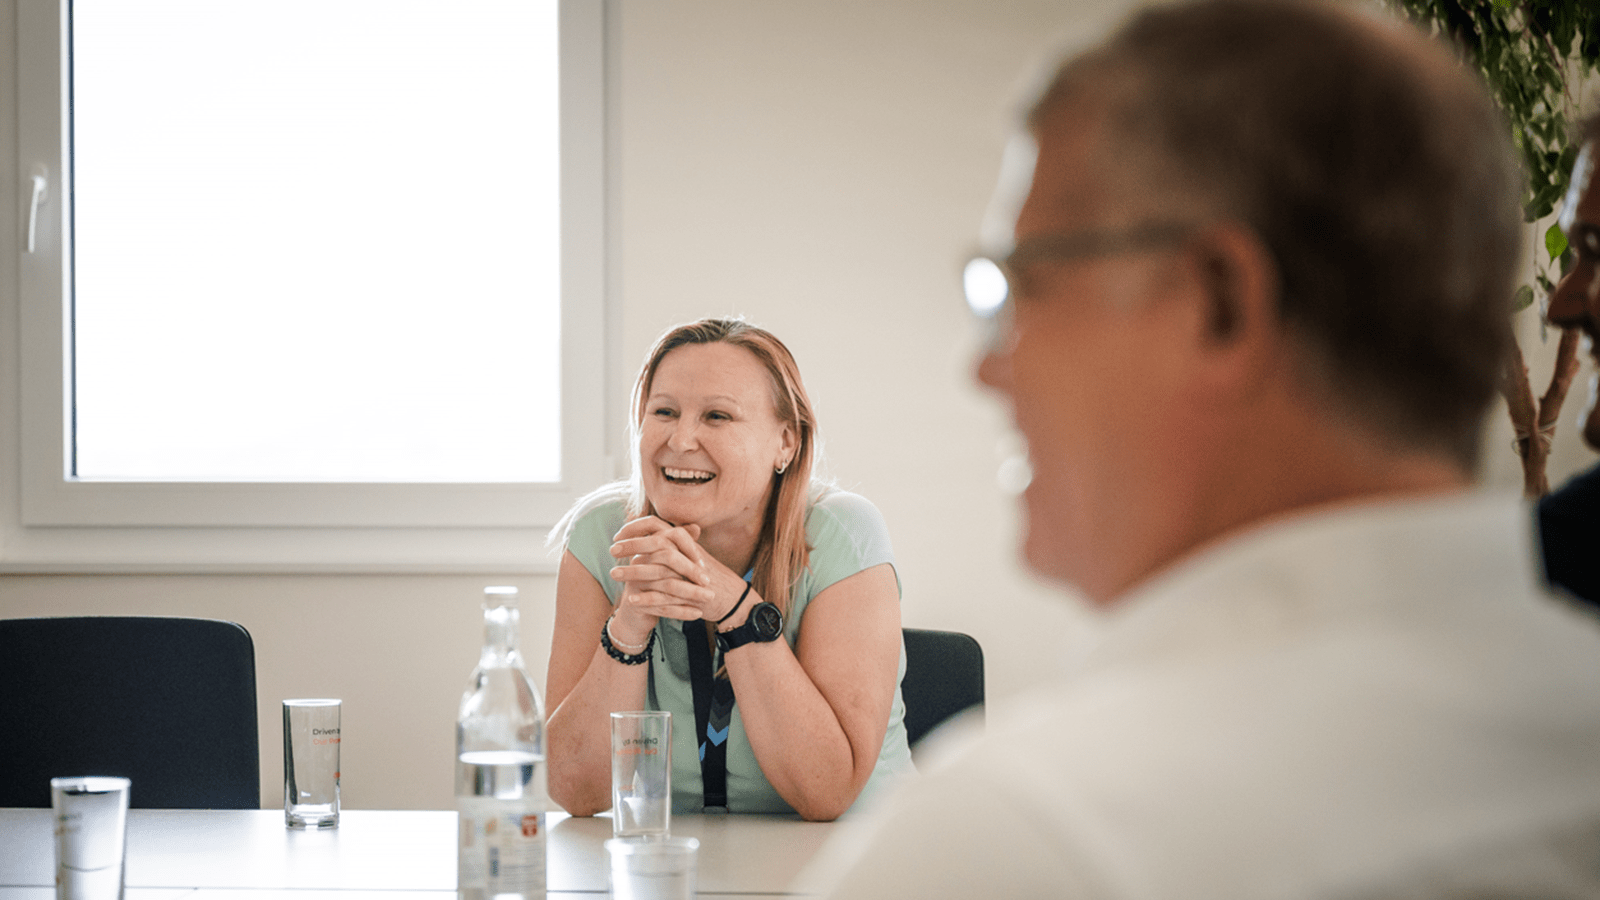 Vicky Pirzas, CSL Vice President, Recombinant Product Development & Managing Director R&D Marburg, smiles during a conference room meeting in Marburg, Germany.